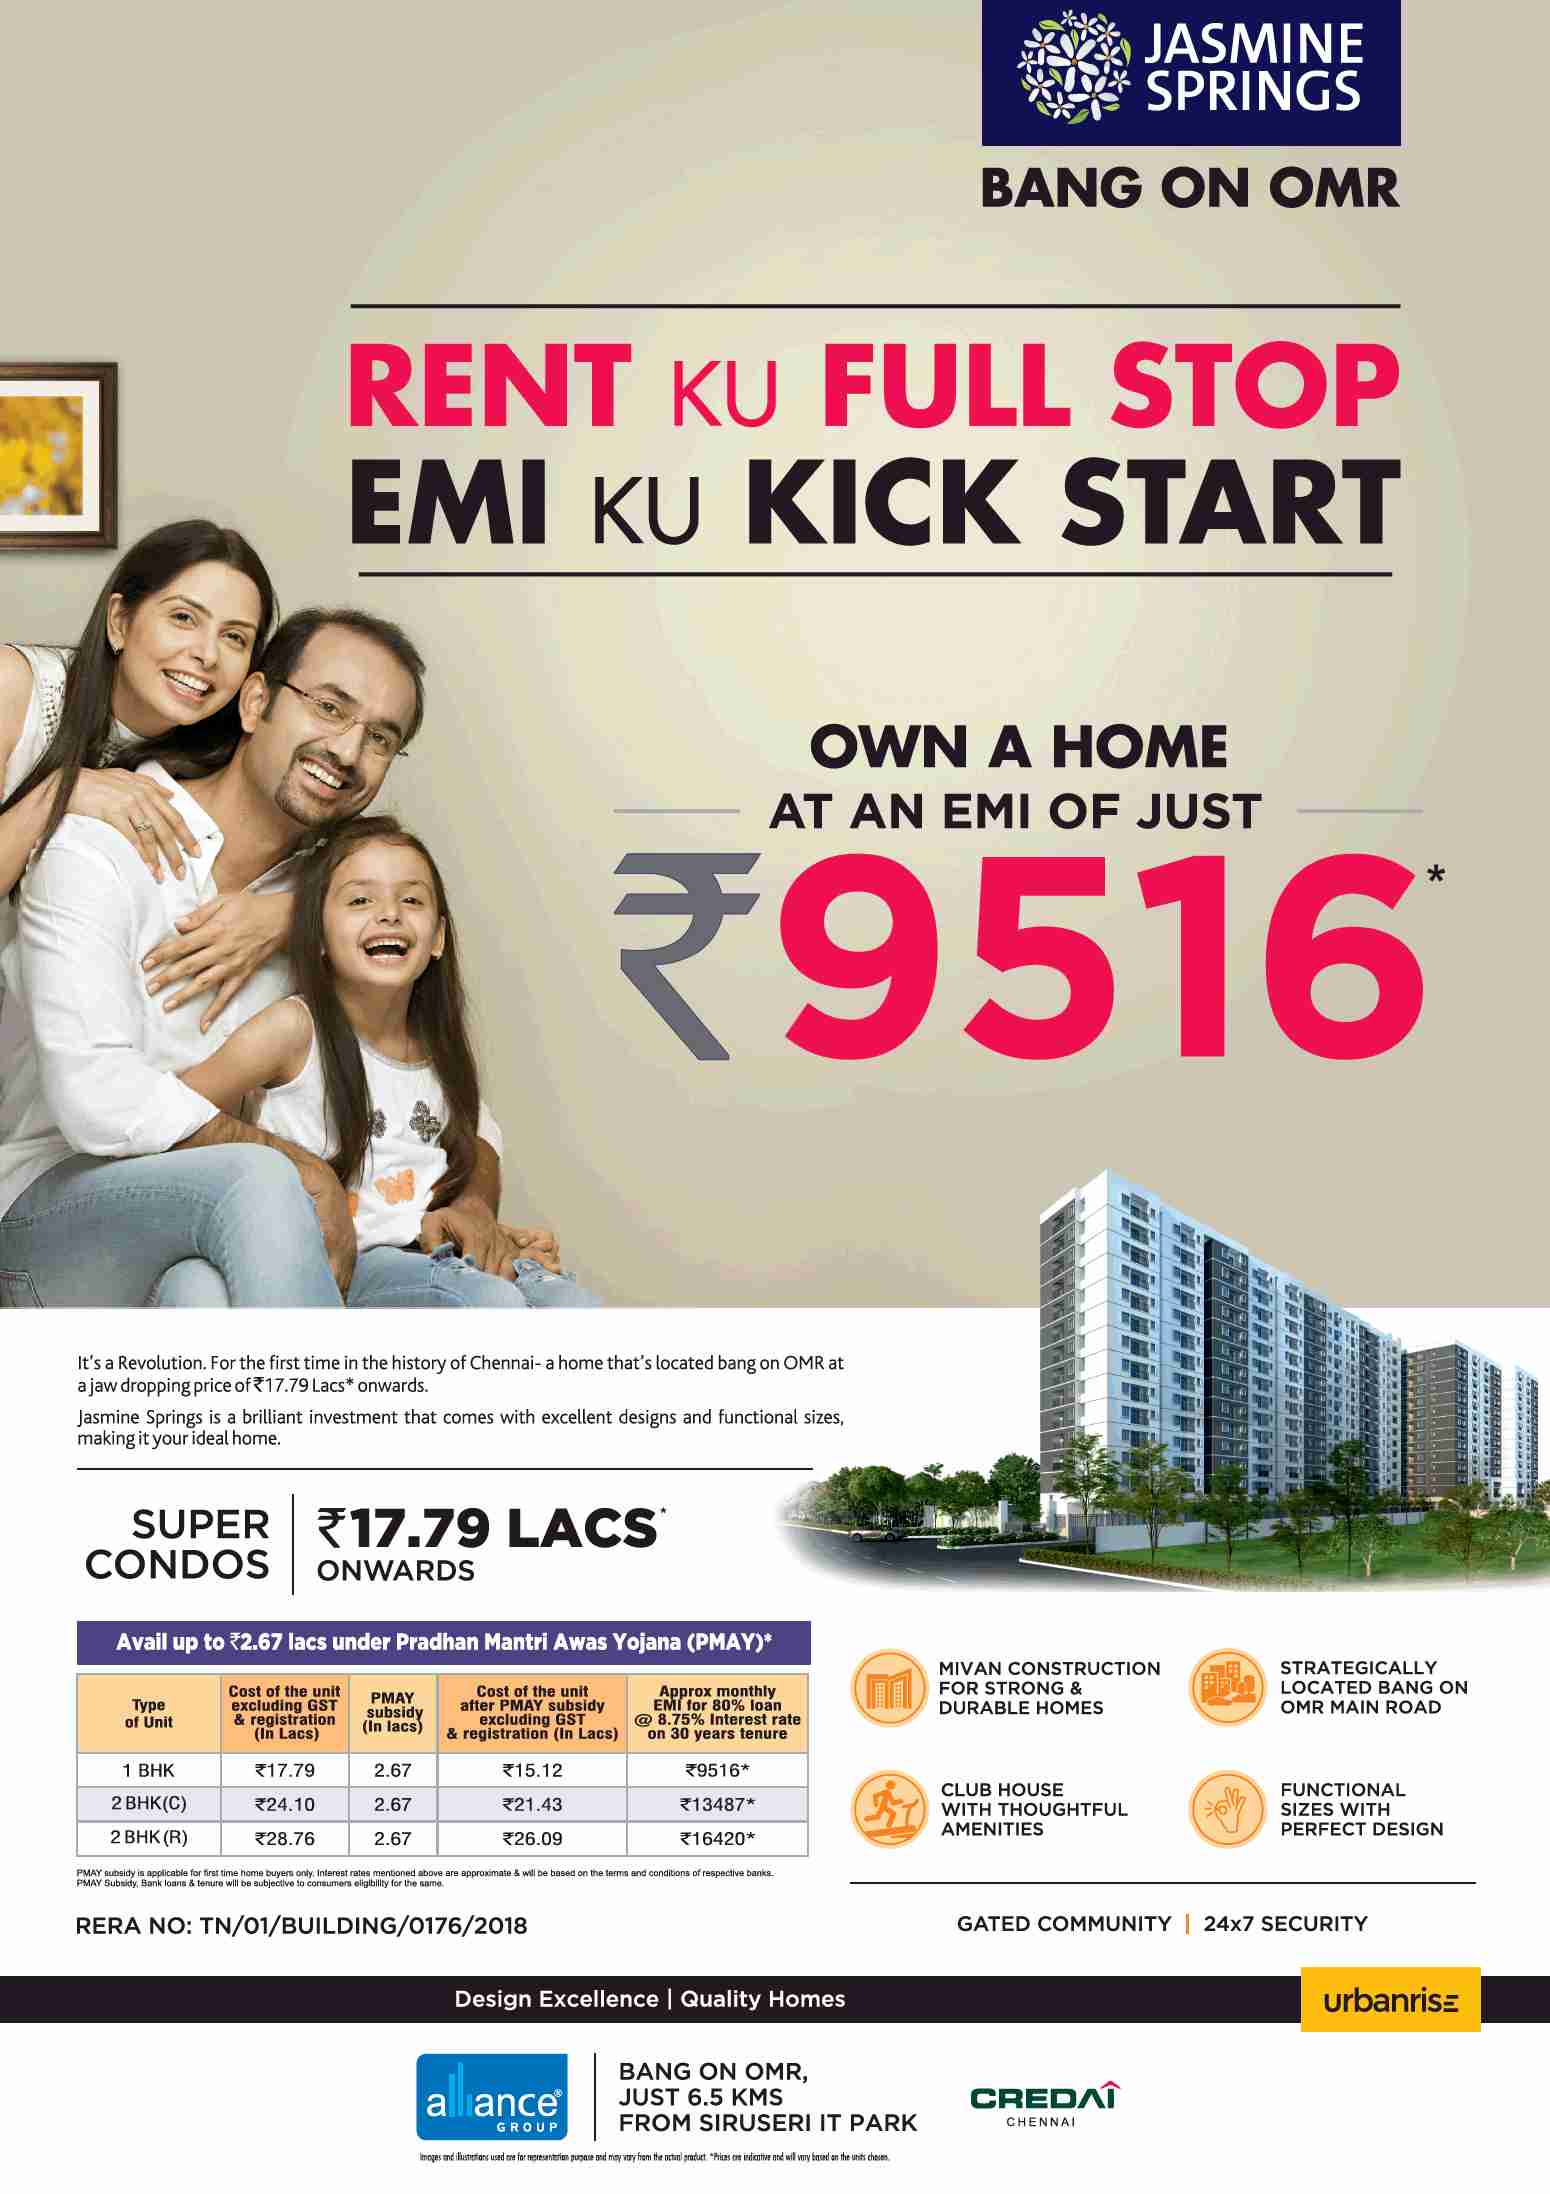 Own a home at an EMI of just Rs. 9516 at Alliance Jasmine Springs in Chennai Update